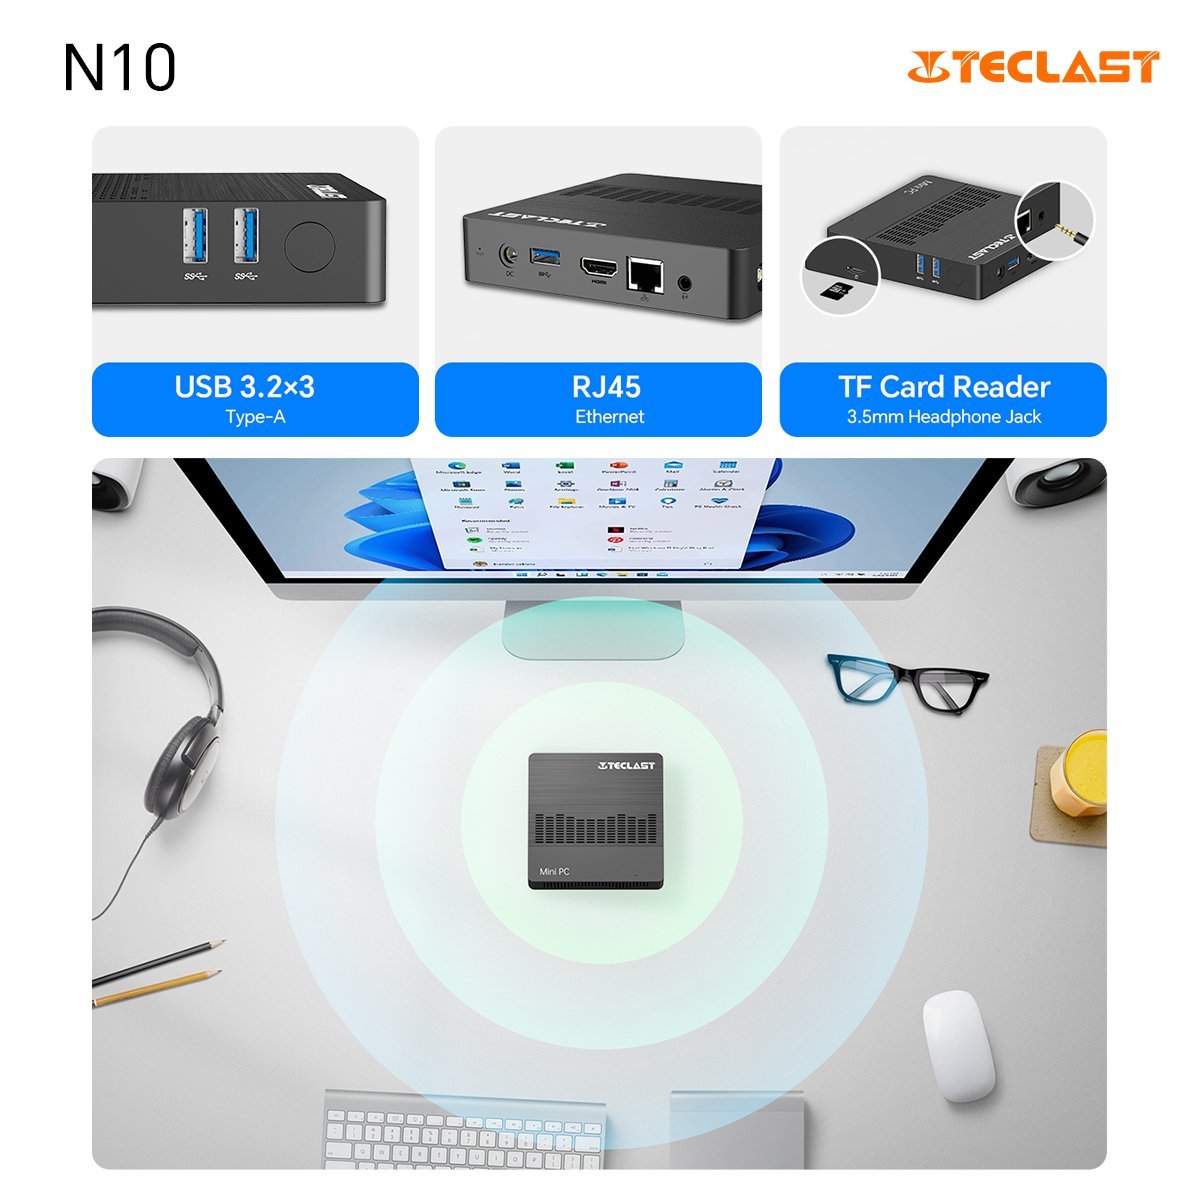 Plug into efficiency with the N10 Mini PC. Ports grand slam interfaces, including USB 3.2 & VGA, ensure seamless connectivity for all your devices. More ports, more possibilities. 🔌✨

Buy Now At $104.99: geni.us/teclastaestore…

#Teclast #Connectivity #TechSolutions #Teclastech